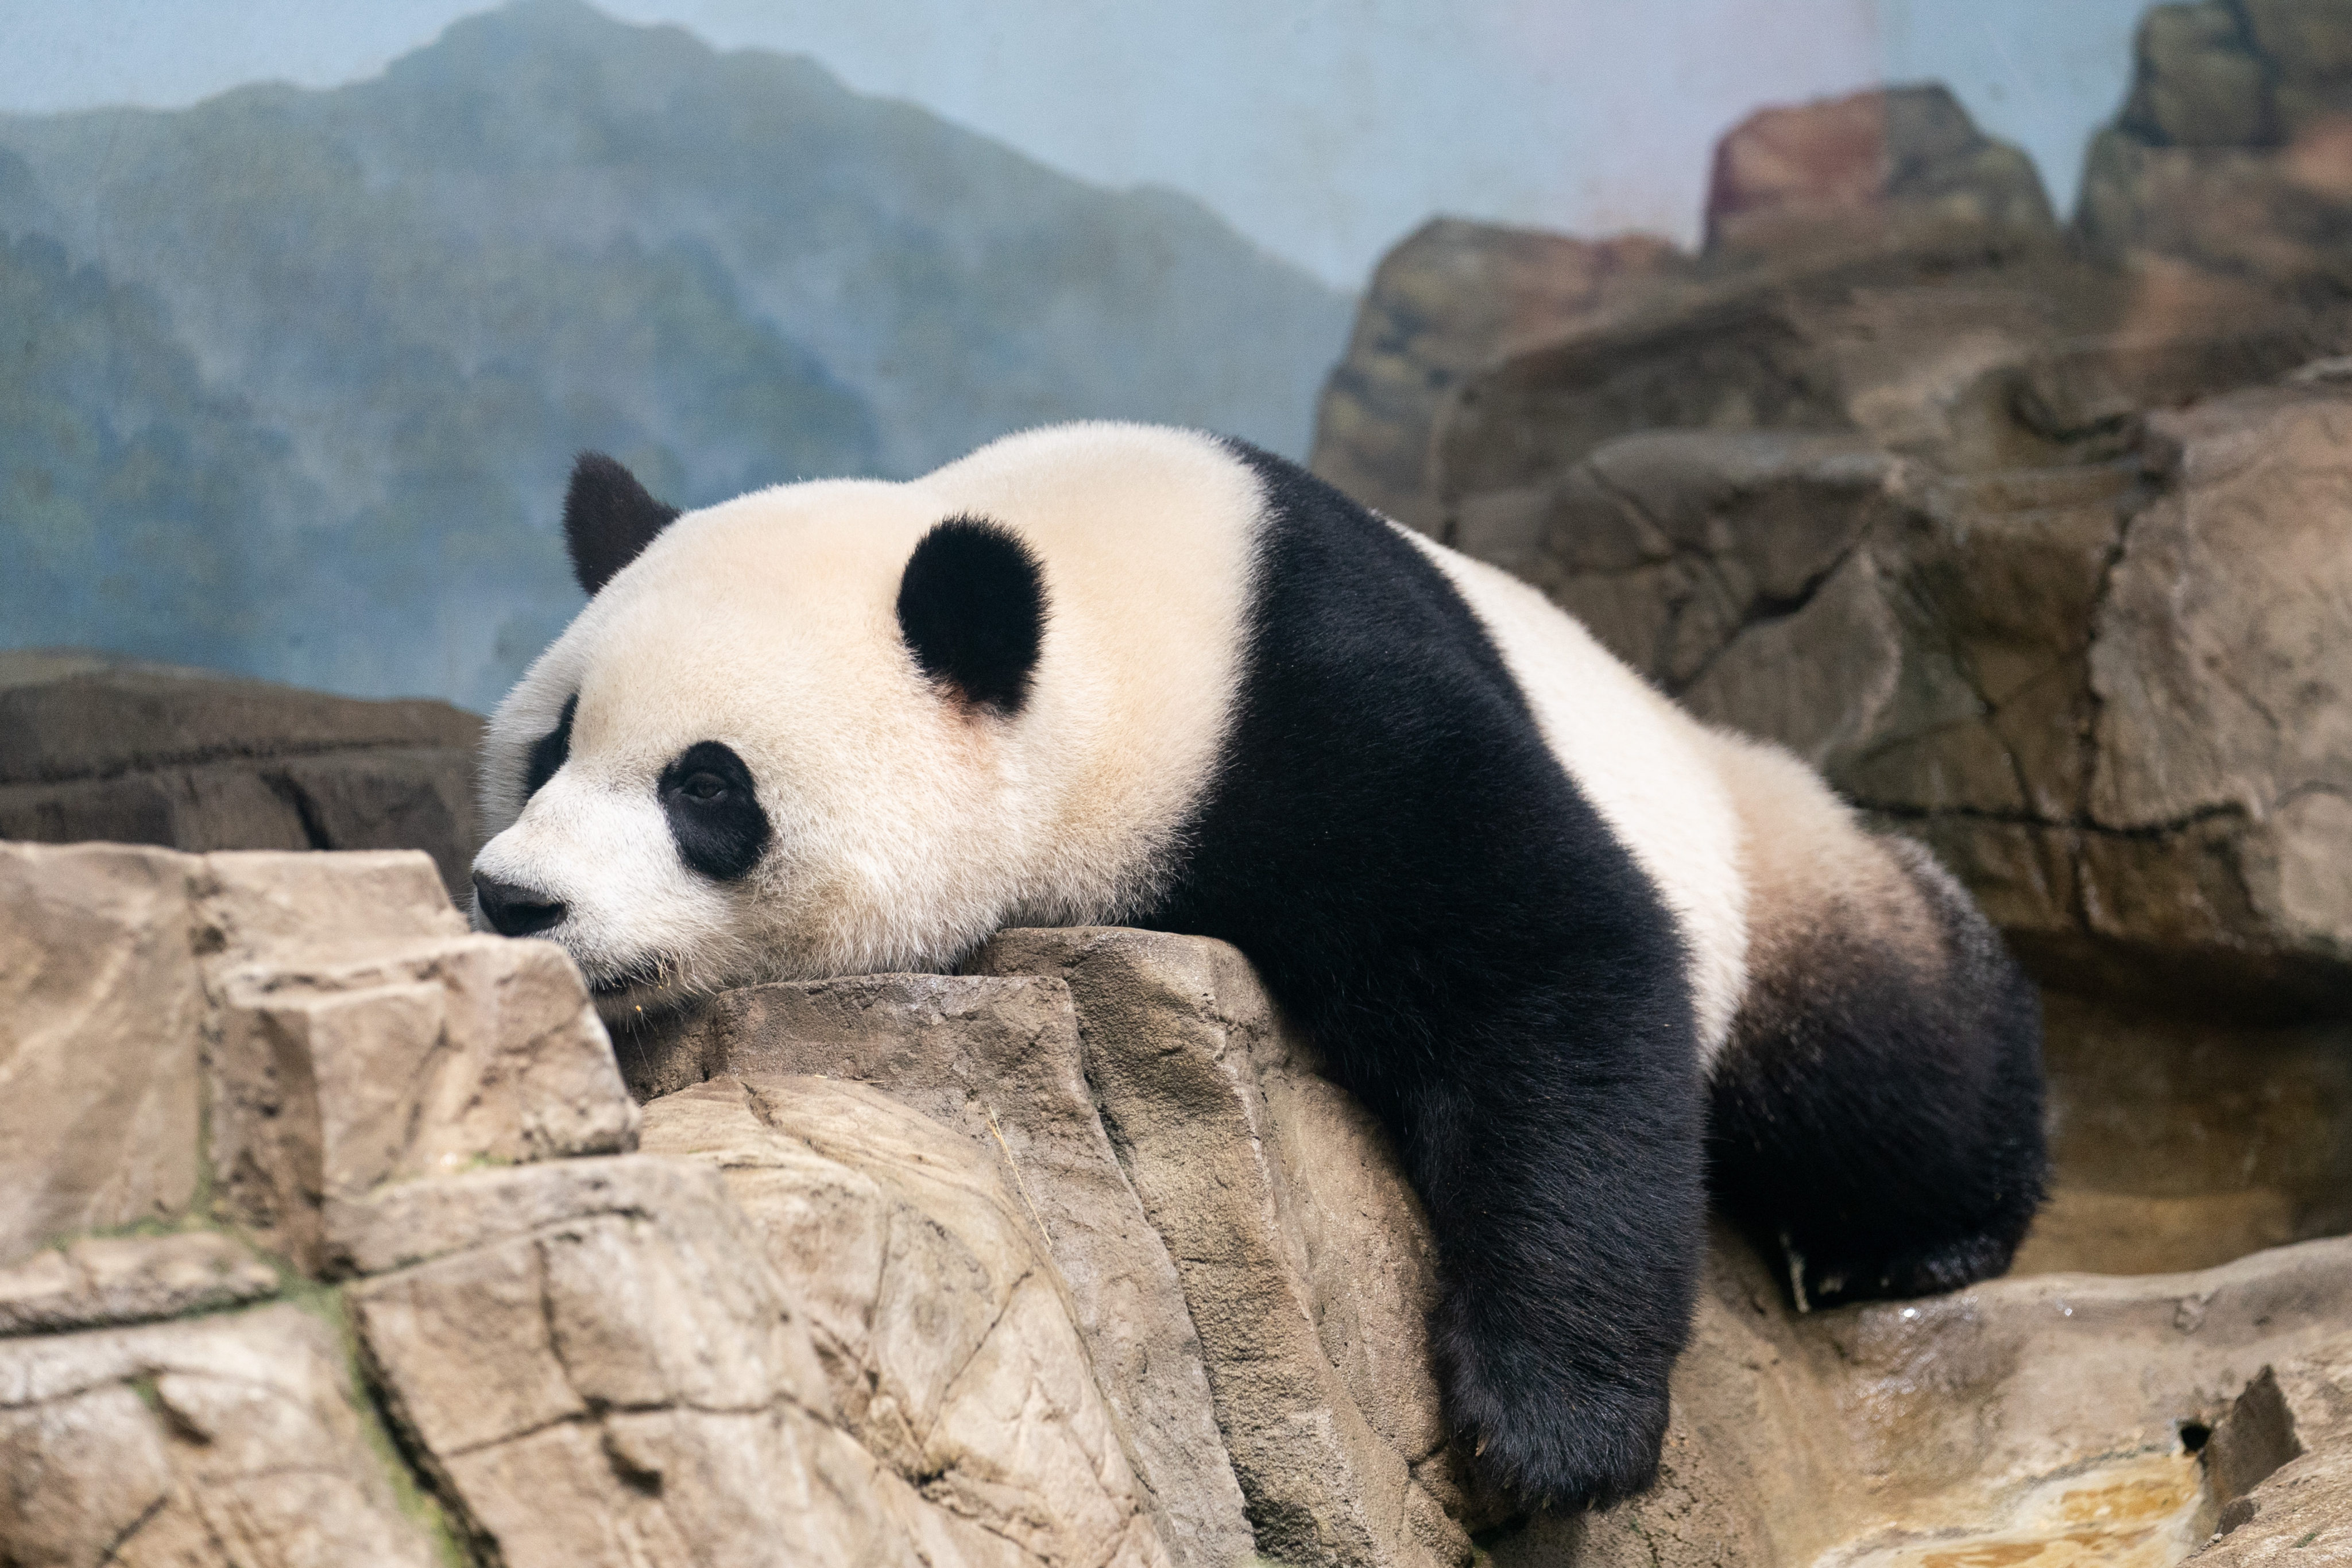 Giant panda Xiao Qi Ji is seen at the Smithsonian’s National Zoo in Washington on September 30. Mei Xiang, Tian Tian and Xiao Qi Ji will be returned home by the end of the year in accordance with a previous agreement with the China Wildlife Conservation Association (CWCA). Photo: Xinhua